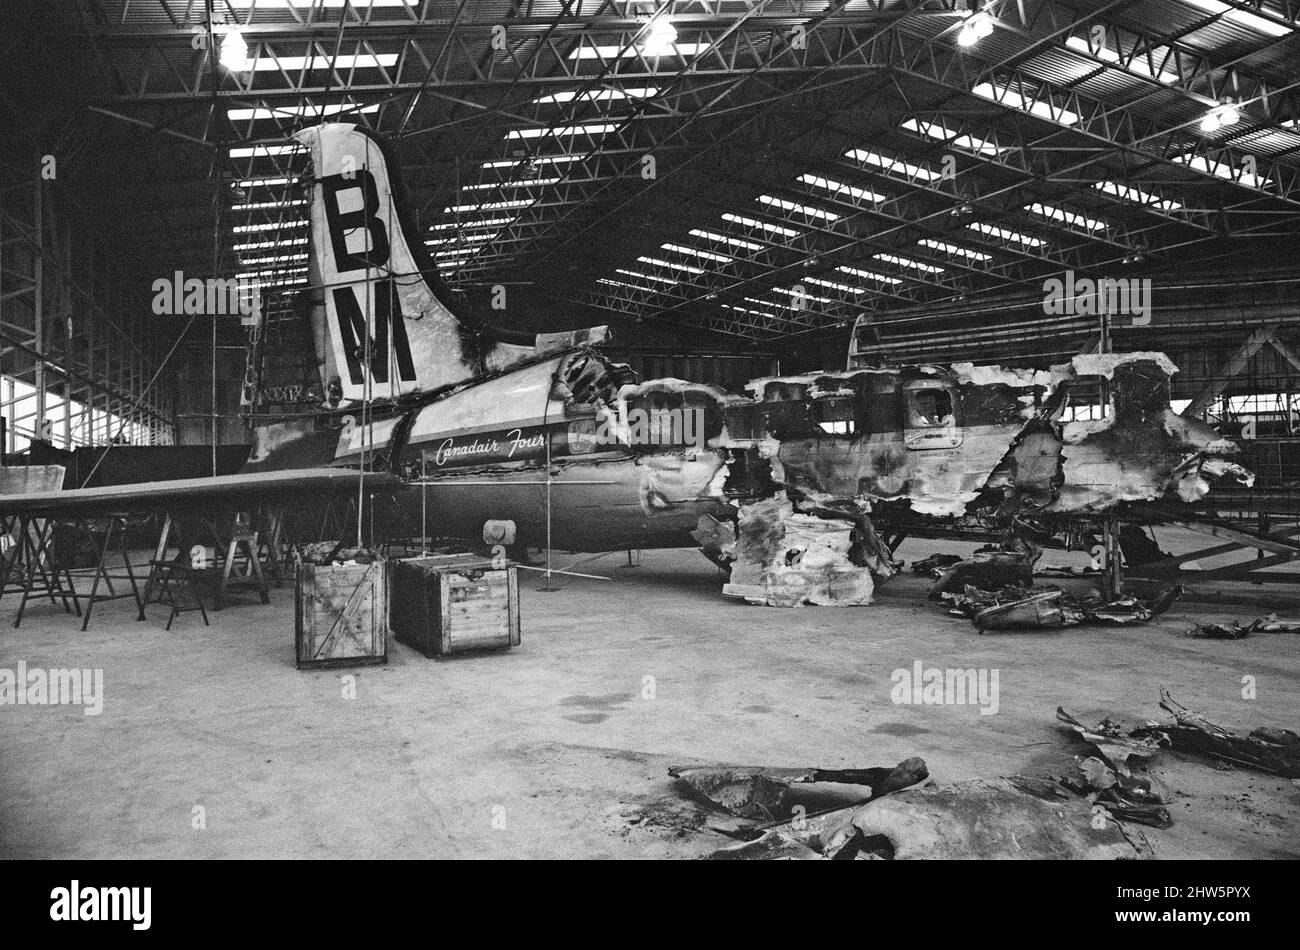 The wreckage of his British Midland plane, now at Farnborough Aerodrome.Captain Marlow Survived the Stockport air crash of 4th June 1967, and is in other frames in this set.  The Stockport air disaster was the crash of a Canadair C-4 Argonaut aircraft owned by British Midland Airways, registration G-ALHG,[1] in a small open area at Hopes Carr near the centre of Stockport, Cheshire, England on Sunday 4 June 1967. 72 of the 84 aboard were killed in the accident. Of the 12 survivors, all were seriously injured. It currently stands as the fourth worst disaster in British aviation history, and the Stock Photo